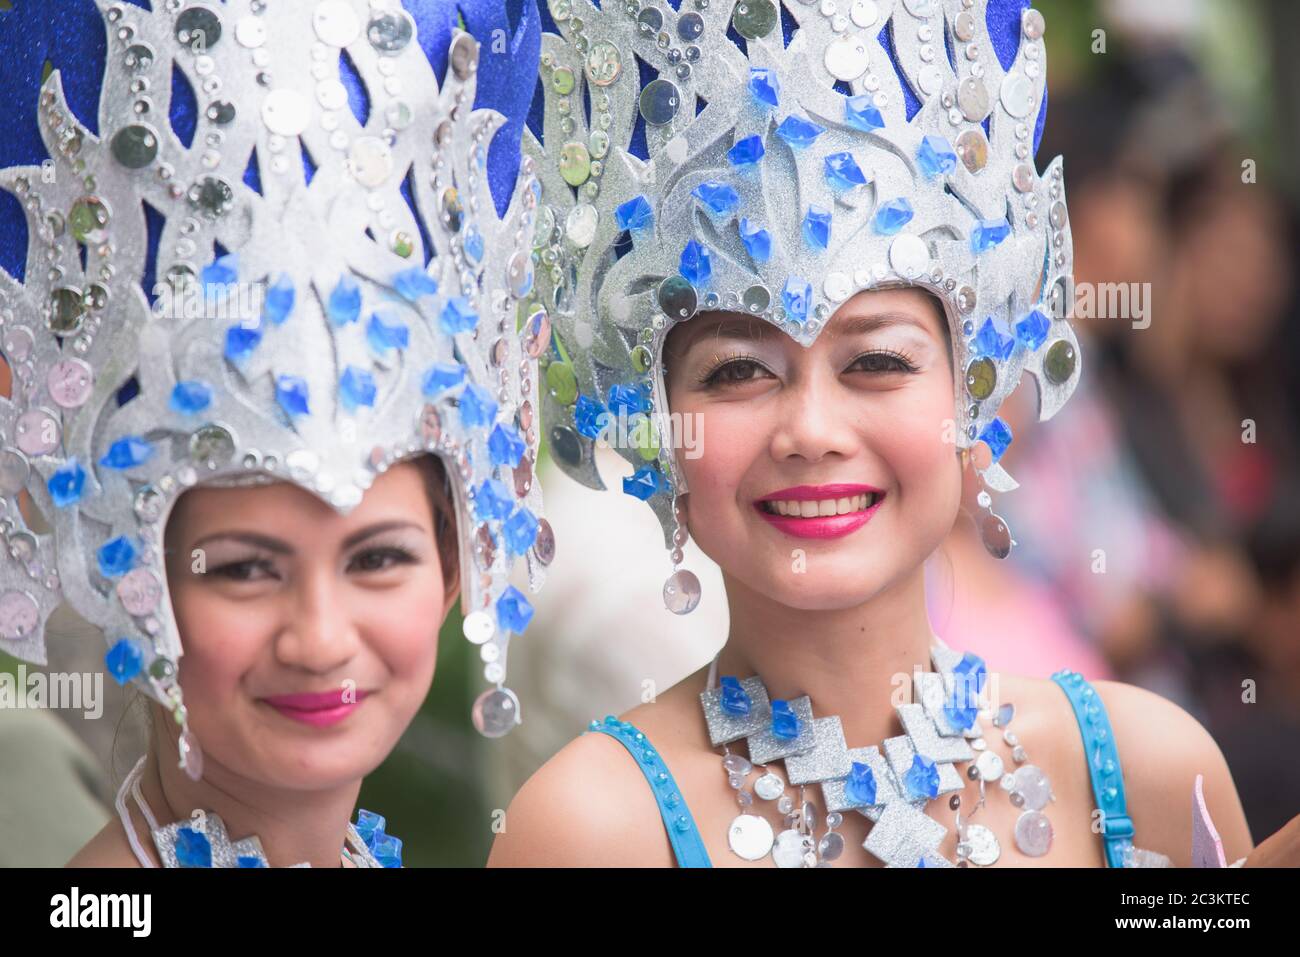 The Float Parade at General Santos Tuna Festival on 1 September 2015 in General Santos City, the southernmost city of the Philippines. Stock Photo